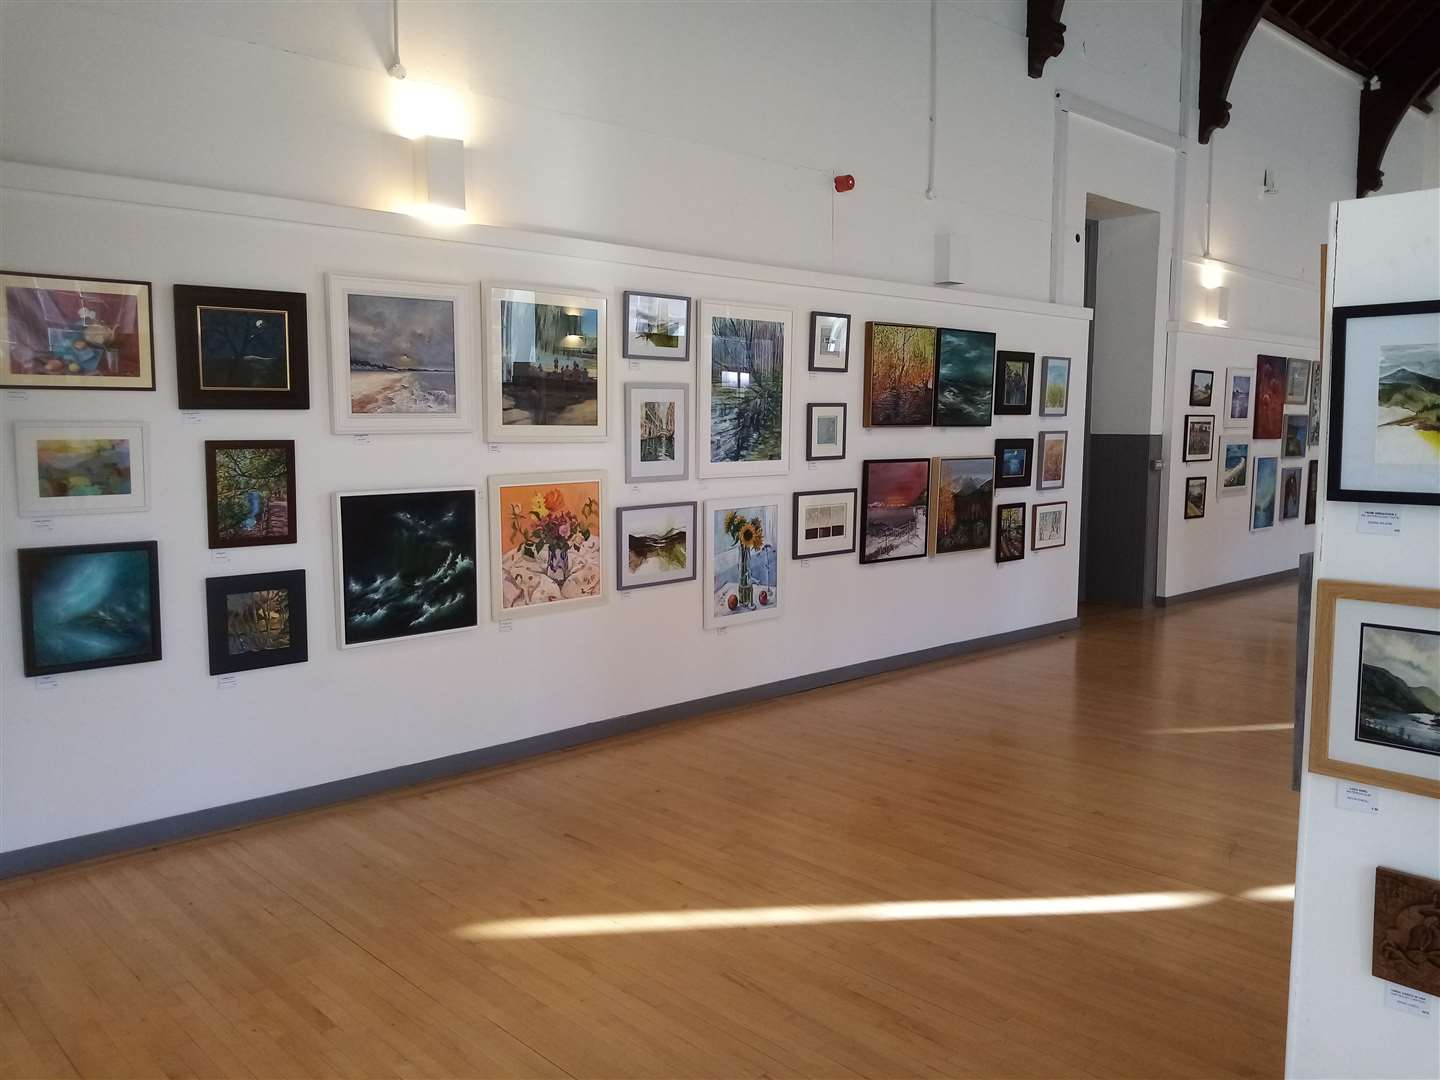 Work by more than 200 artists is featured at the Art Society of Inverness exhibition.